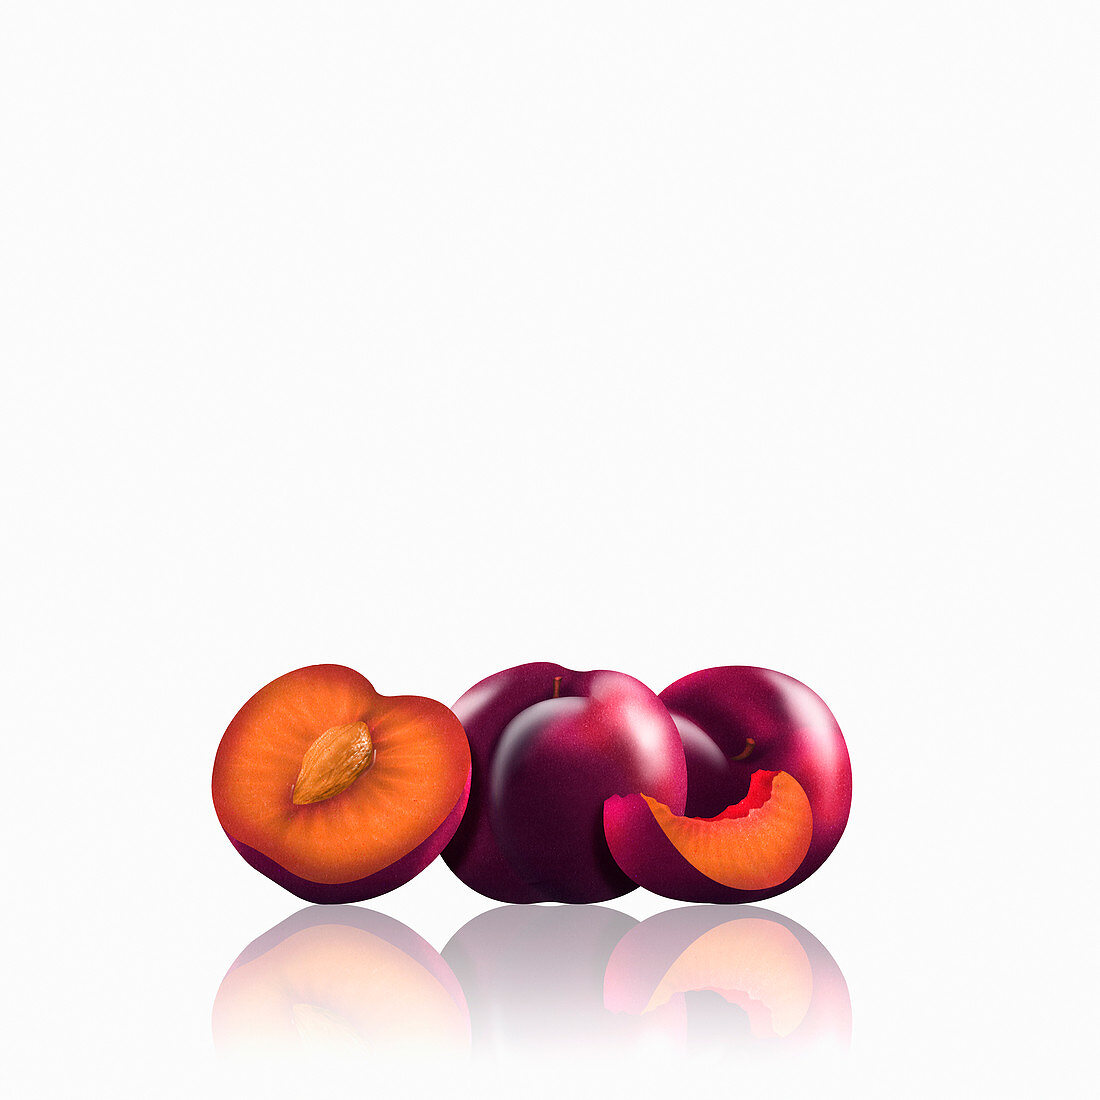 Whole and cut red plums, illustration